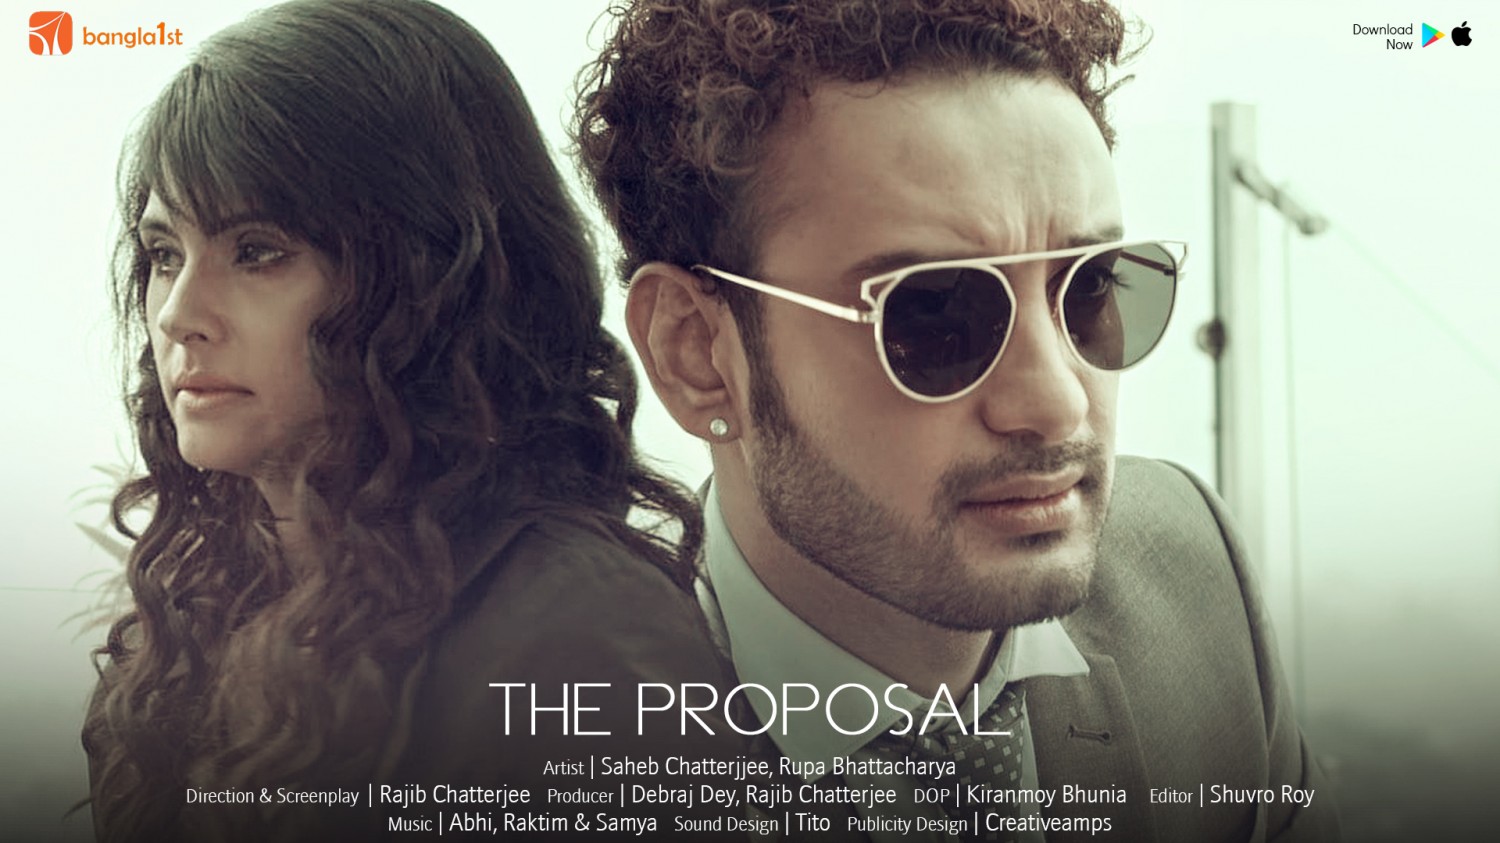 Extra Large Movie Poster Image for The Proposal